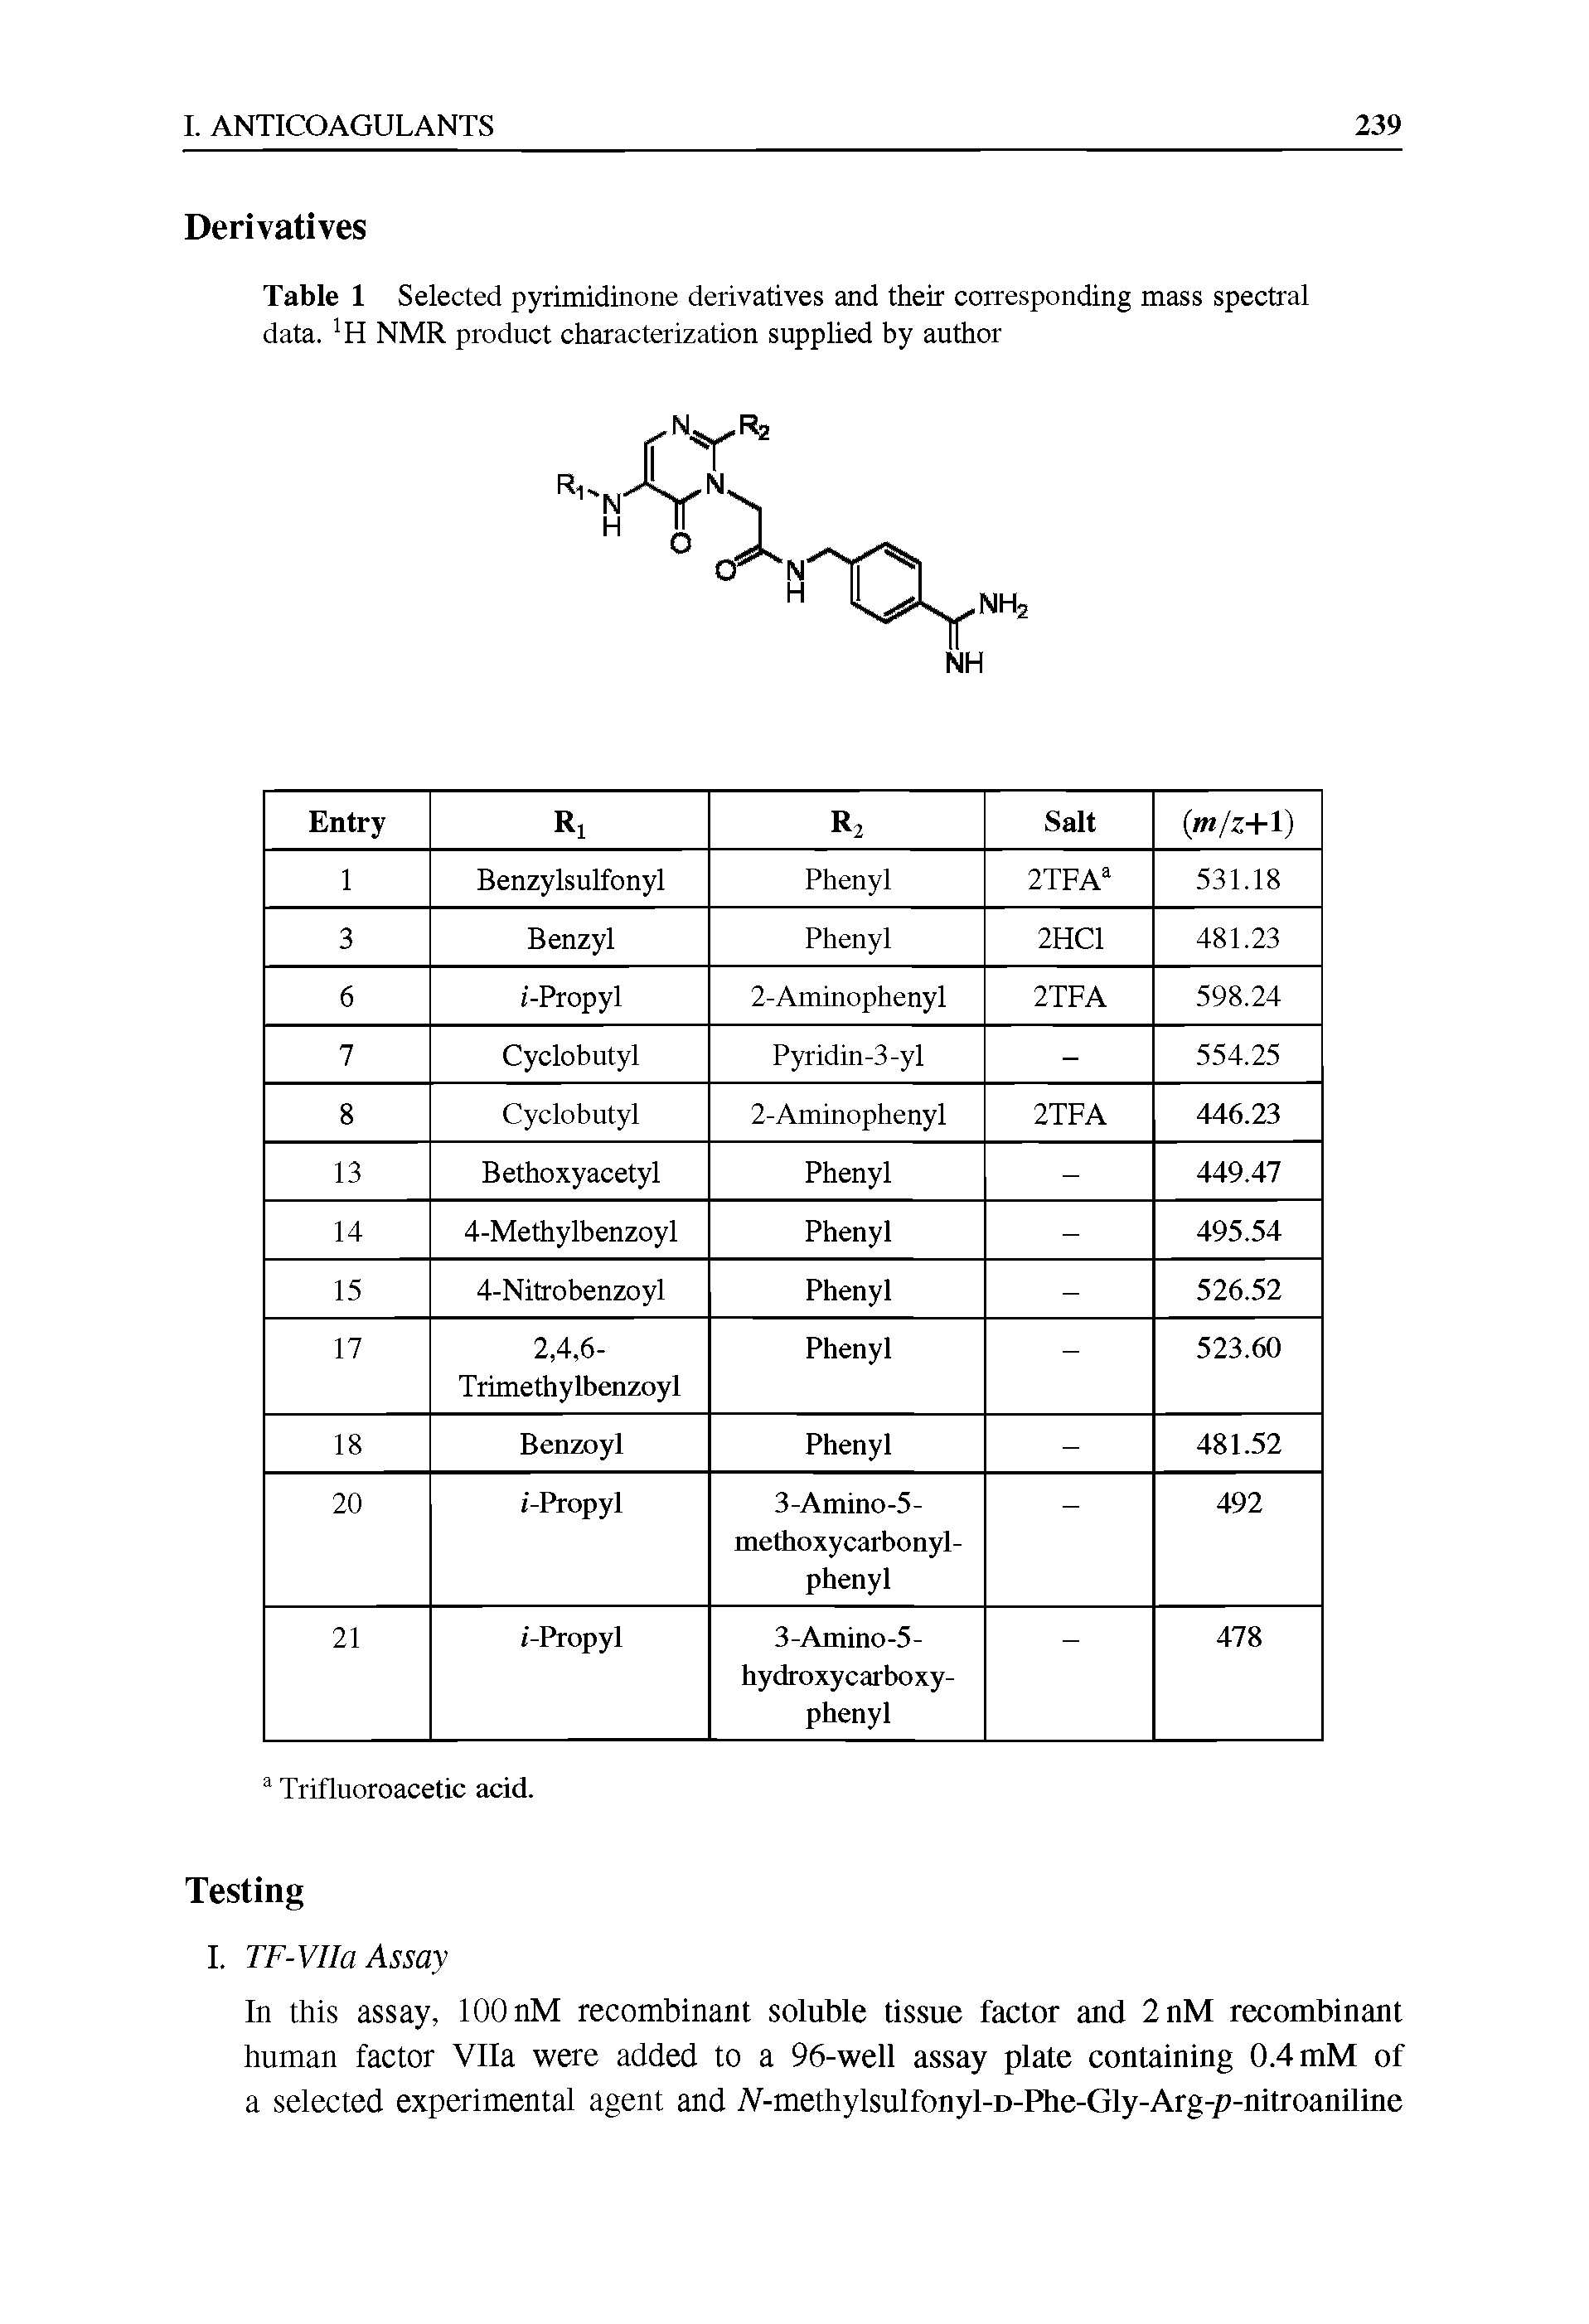 Table 1 Selected pyrimidinone derivatives and their corresponding mass spectral data. H NMR product characterization supplied by author...